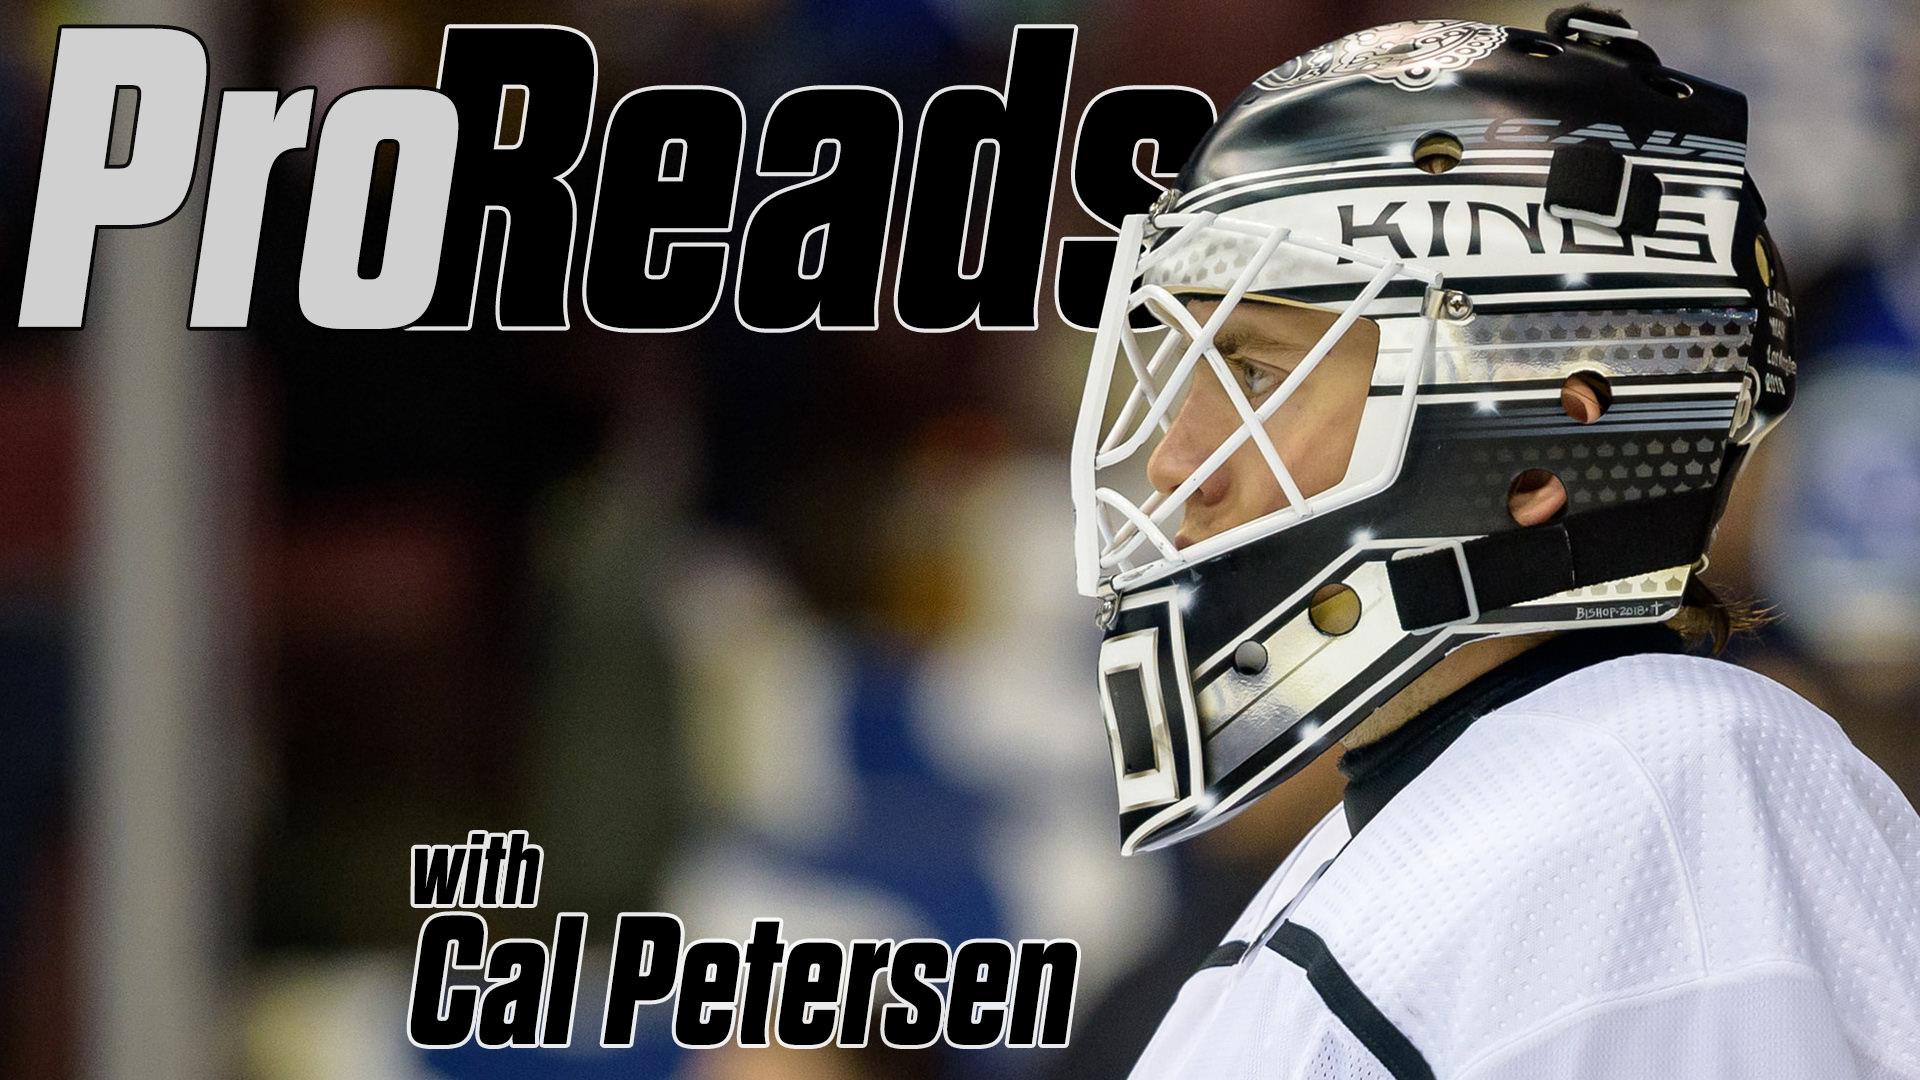 Backhand tip? No problem after Cal Petersen shows you how to read it.